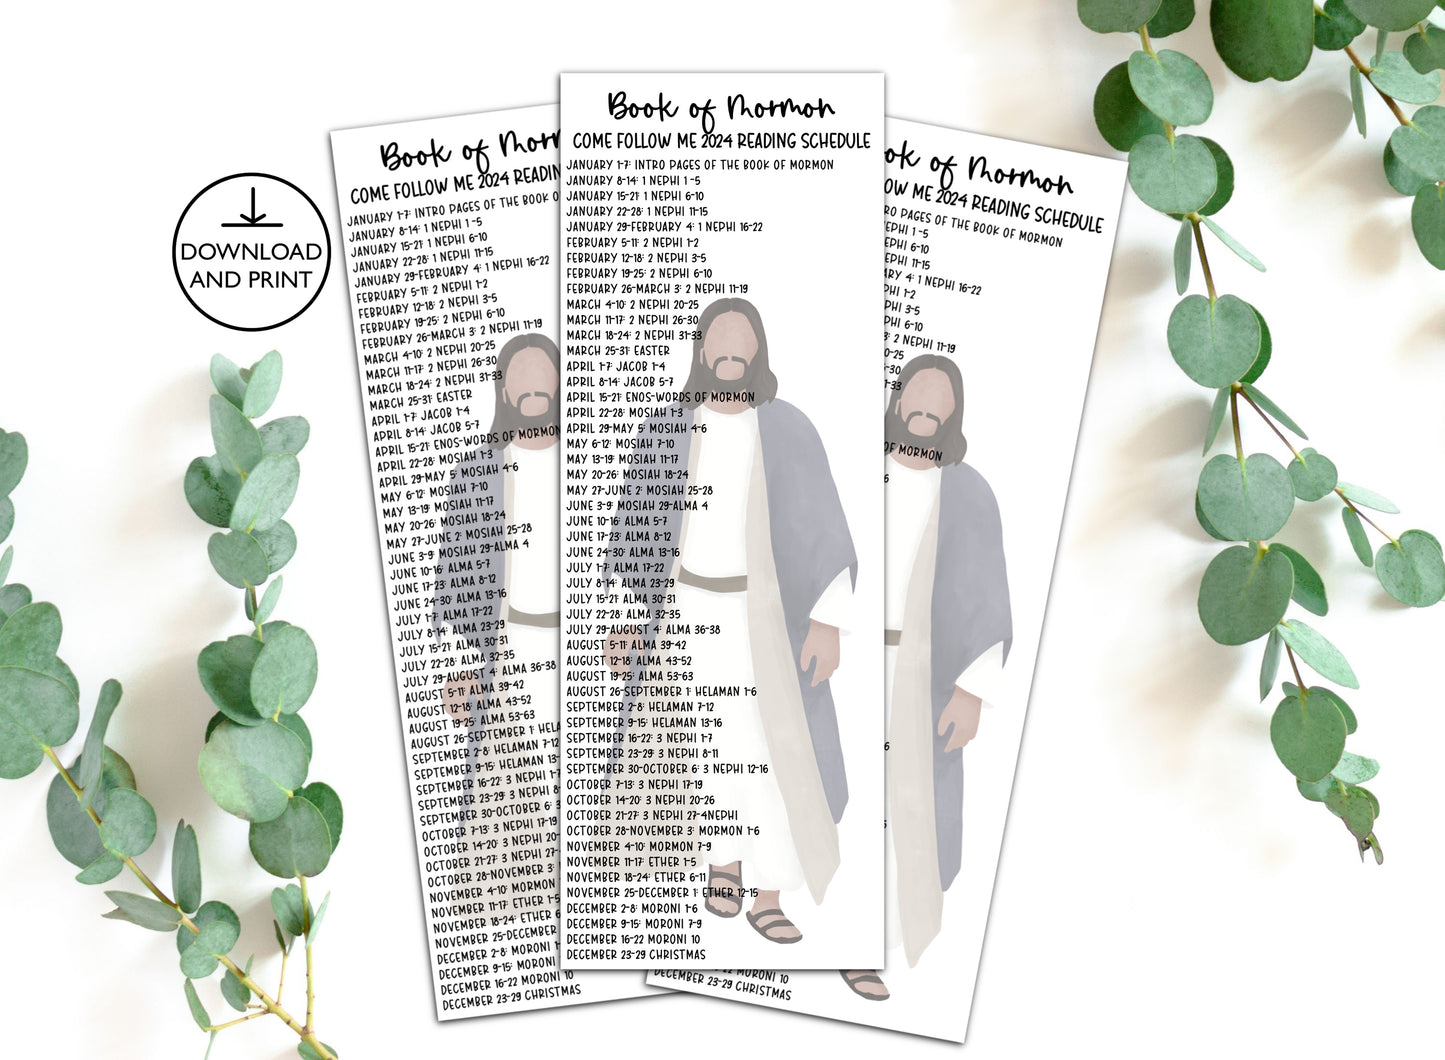 Come Follow Me 2024 Book of Mormon Reading Schedule Bookmarks